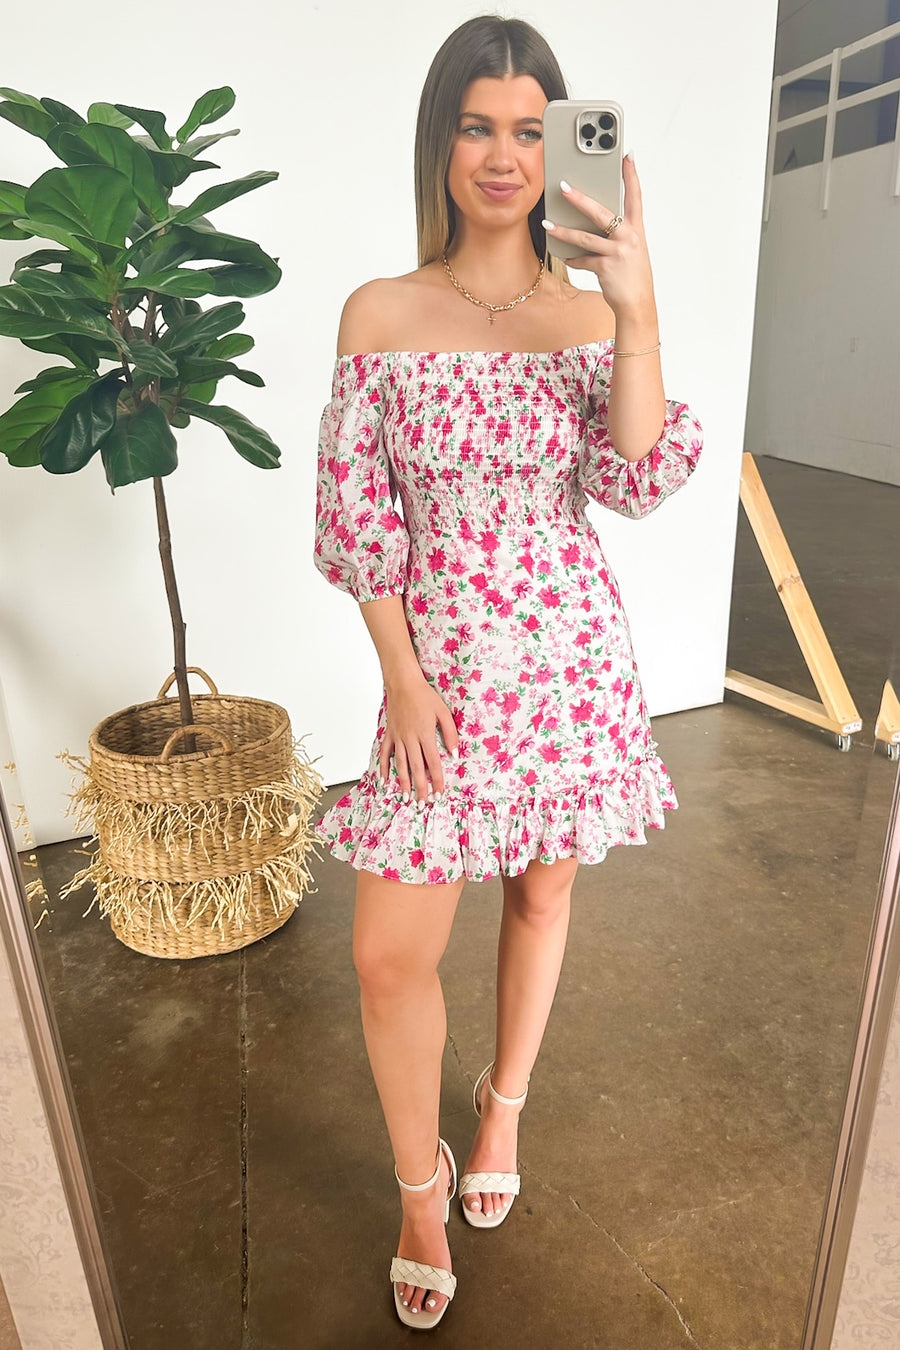  Darling Icon Off Shoulder Smocked Floral Dress - Madison and Mallory